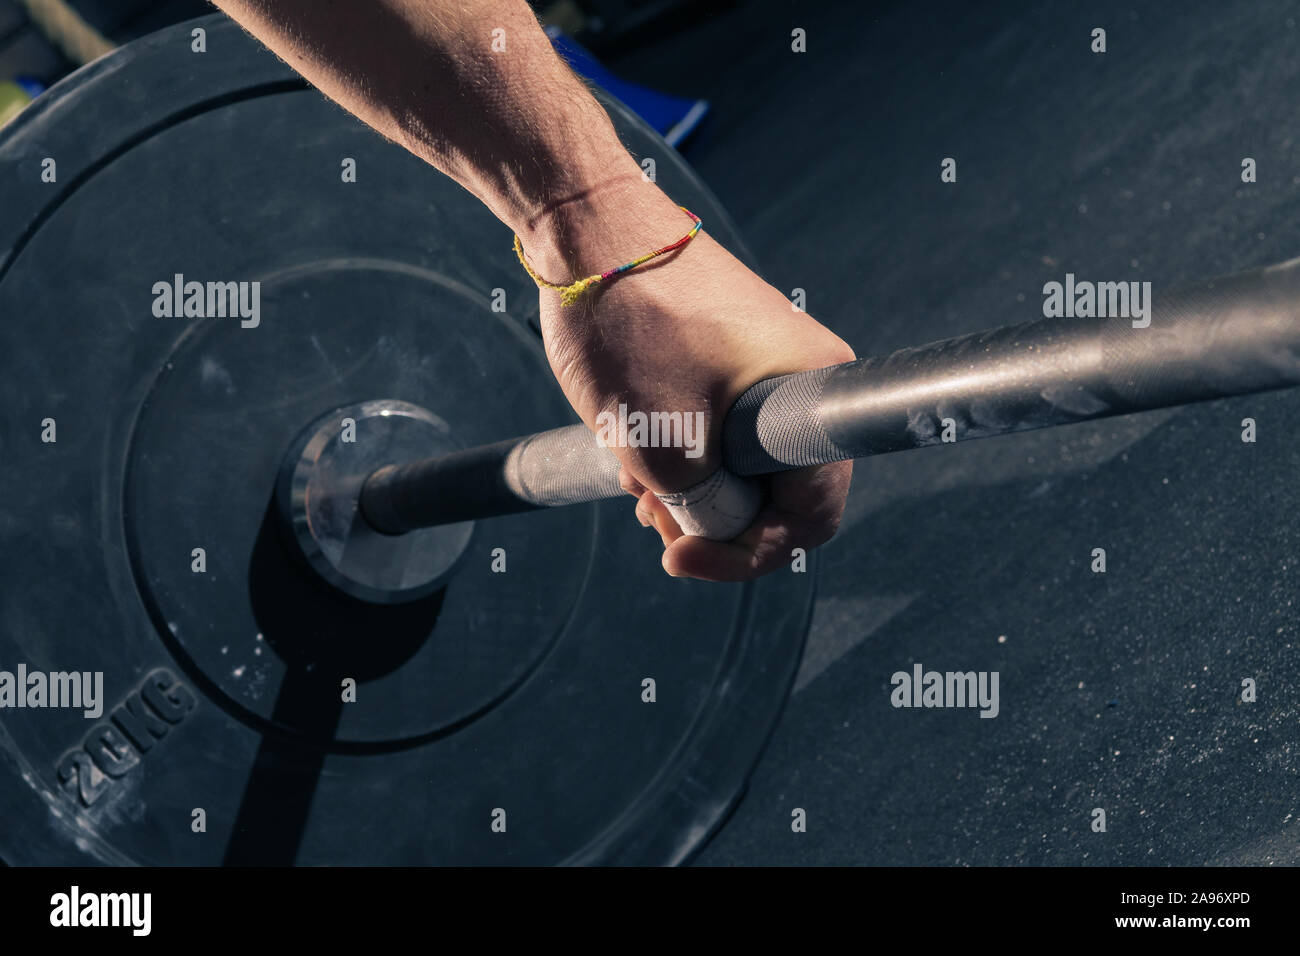 Closeup of man's left hand with bracelet hook gripping a barbell with 20kg plates Stock Photo